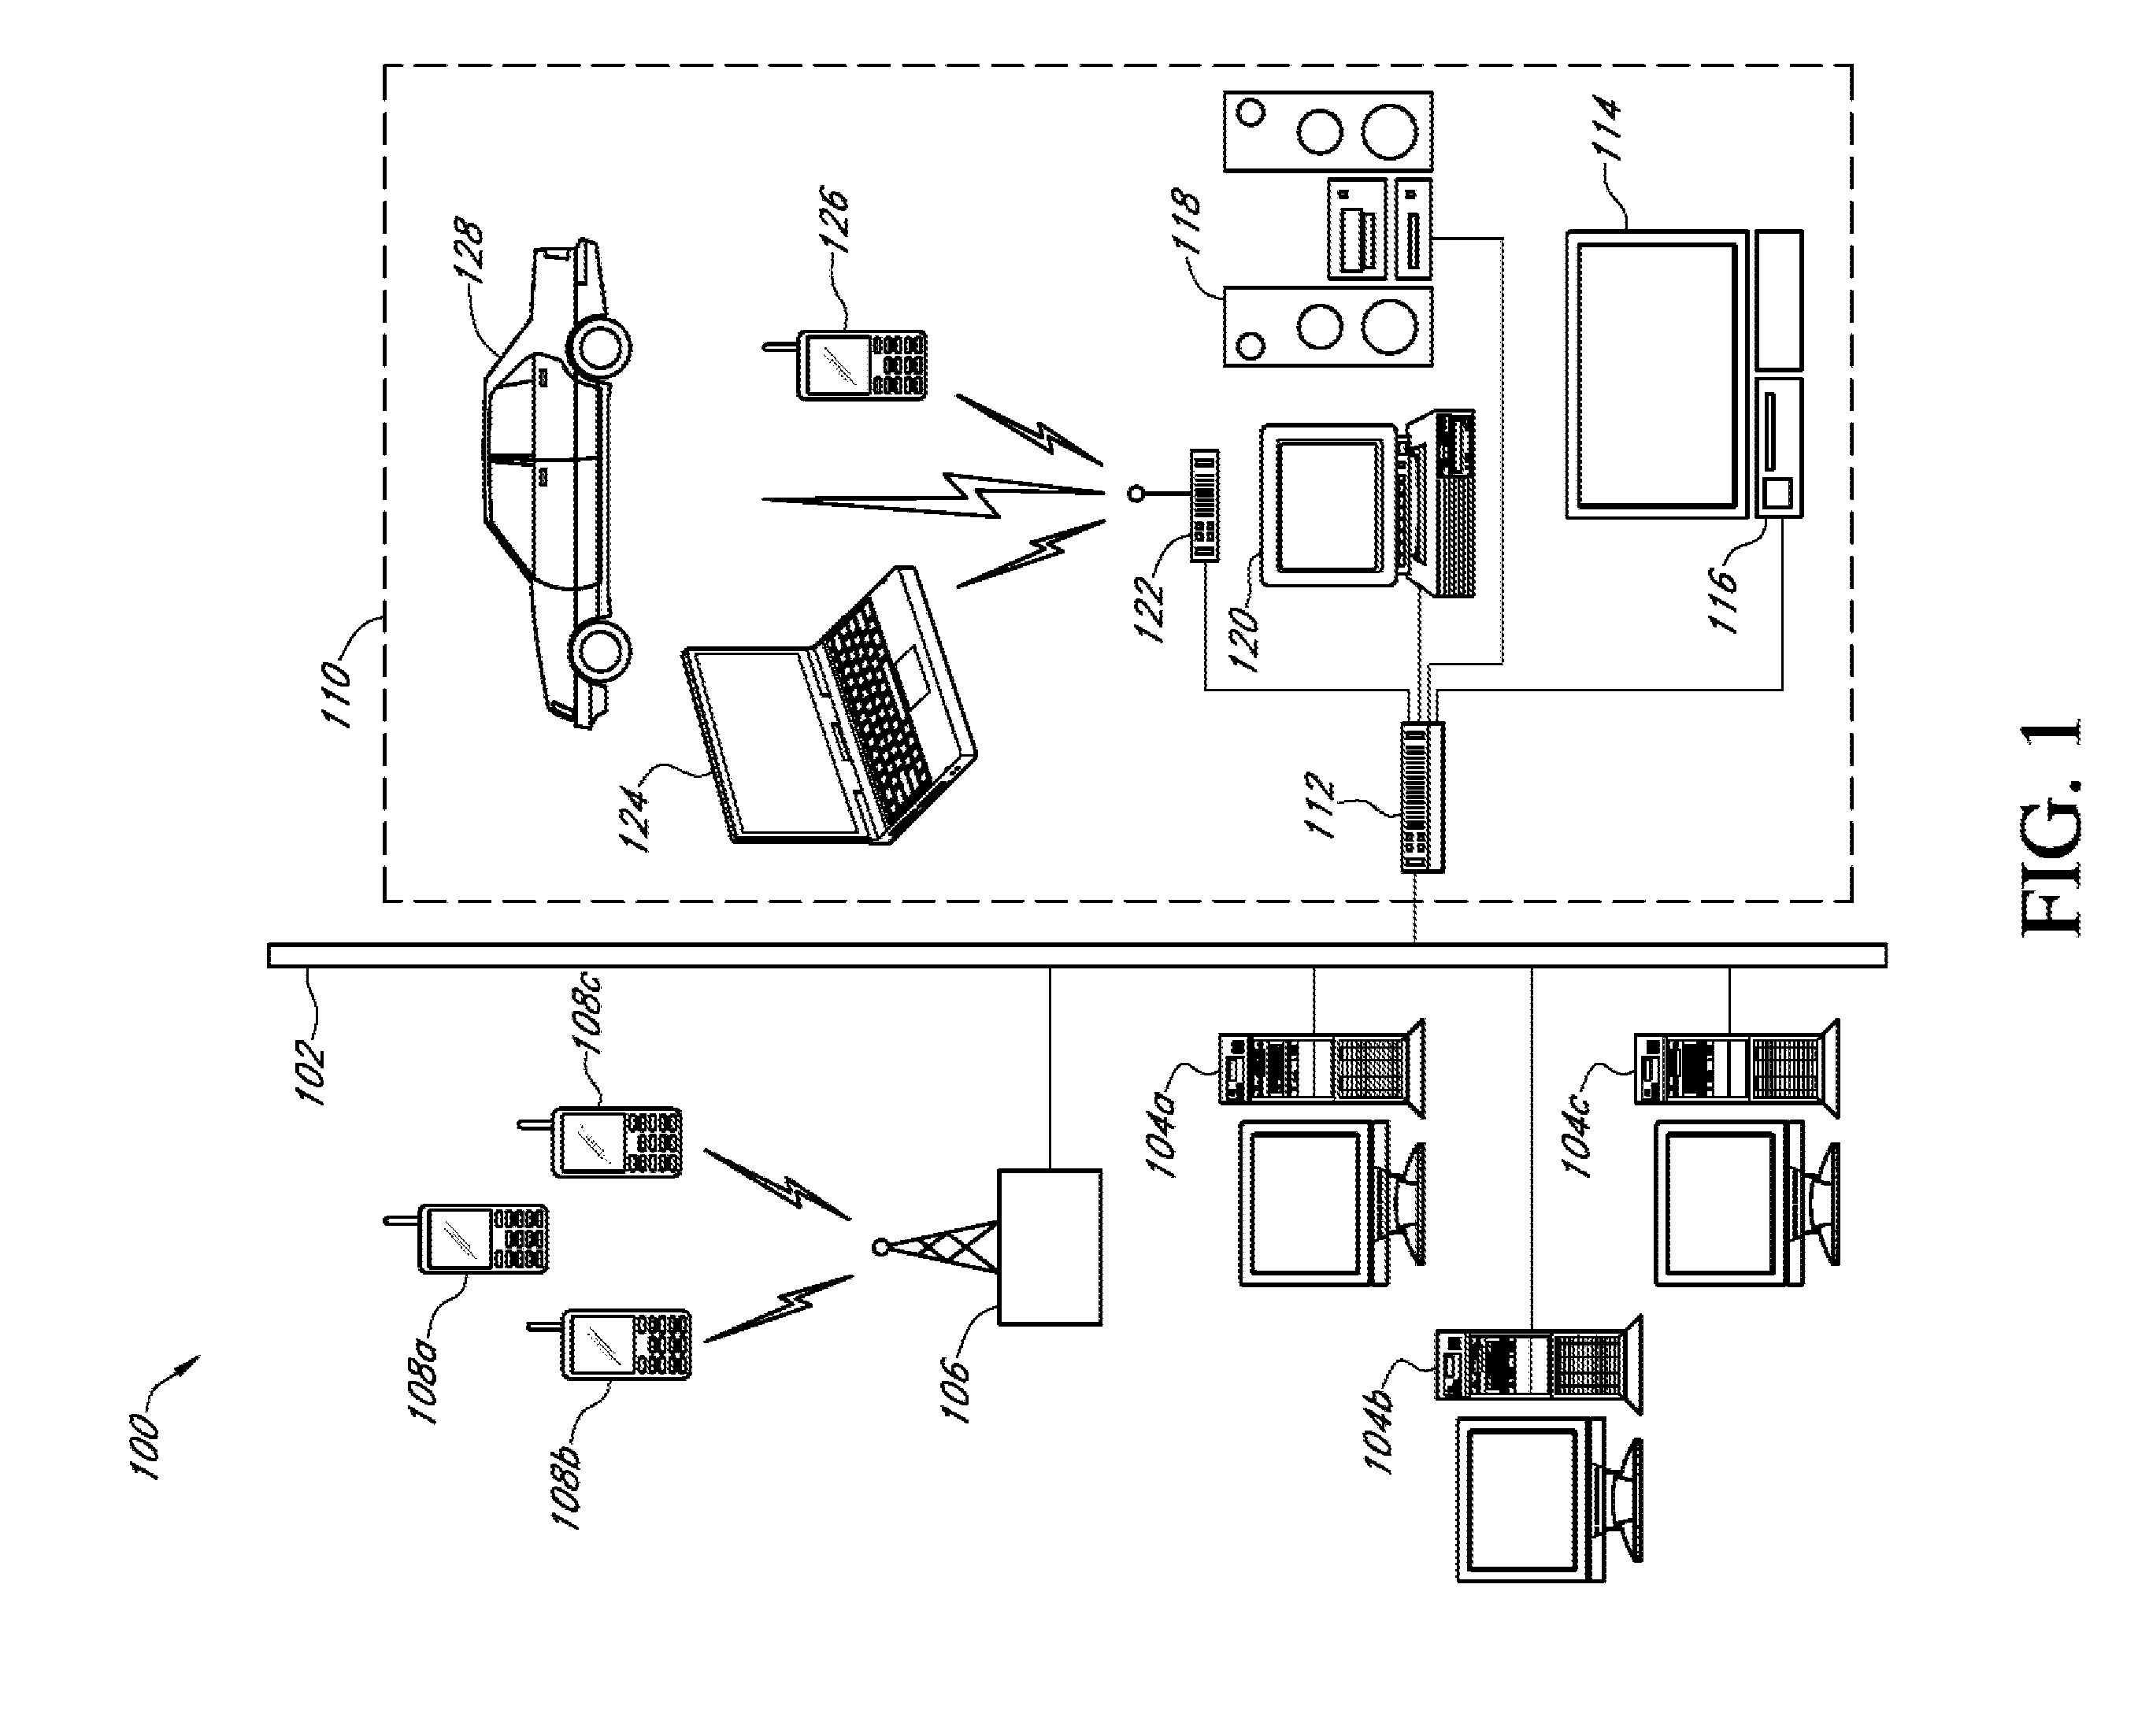 Systems and methods for device dependent media content delivery in a local area network